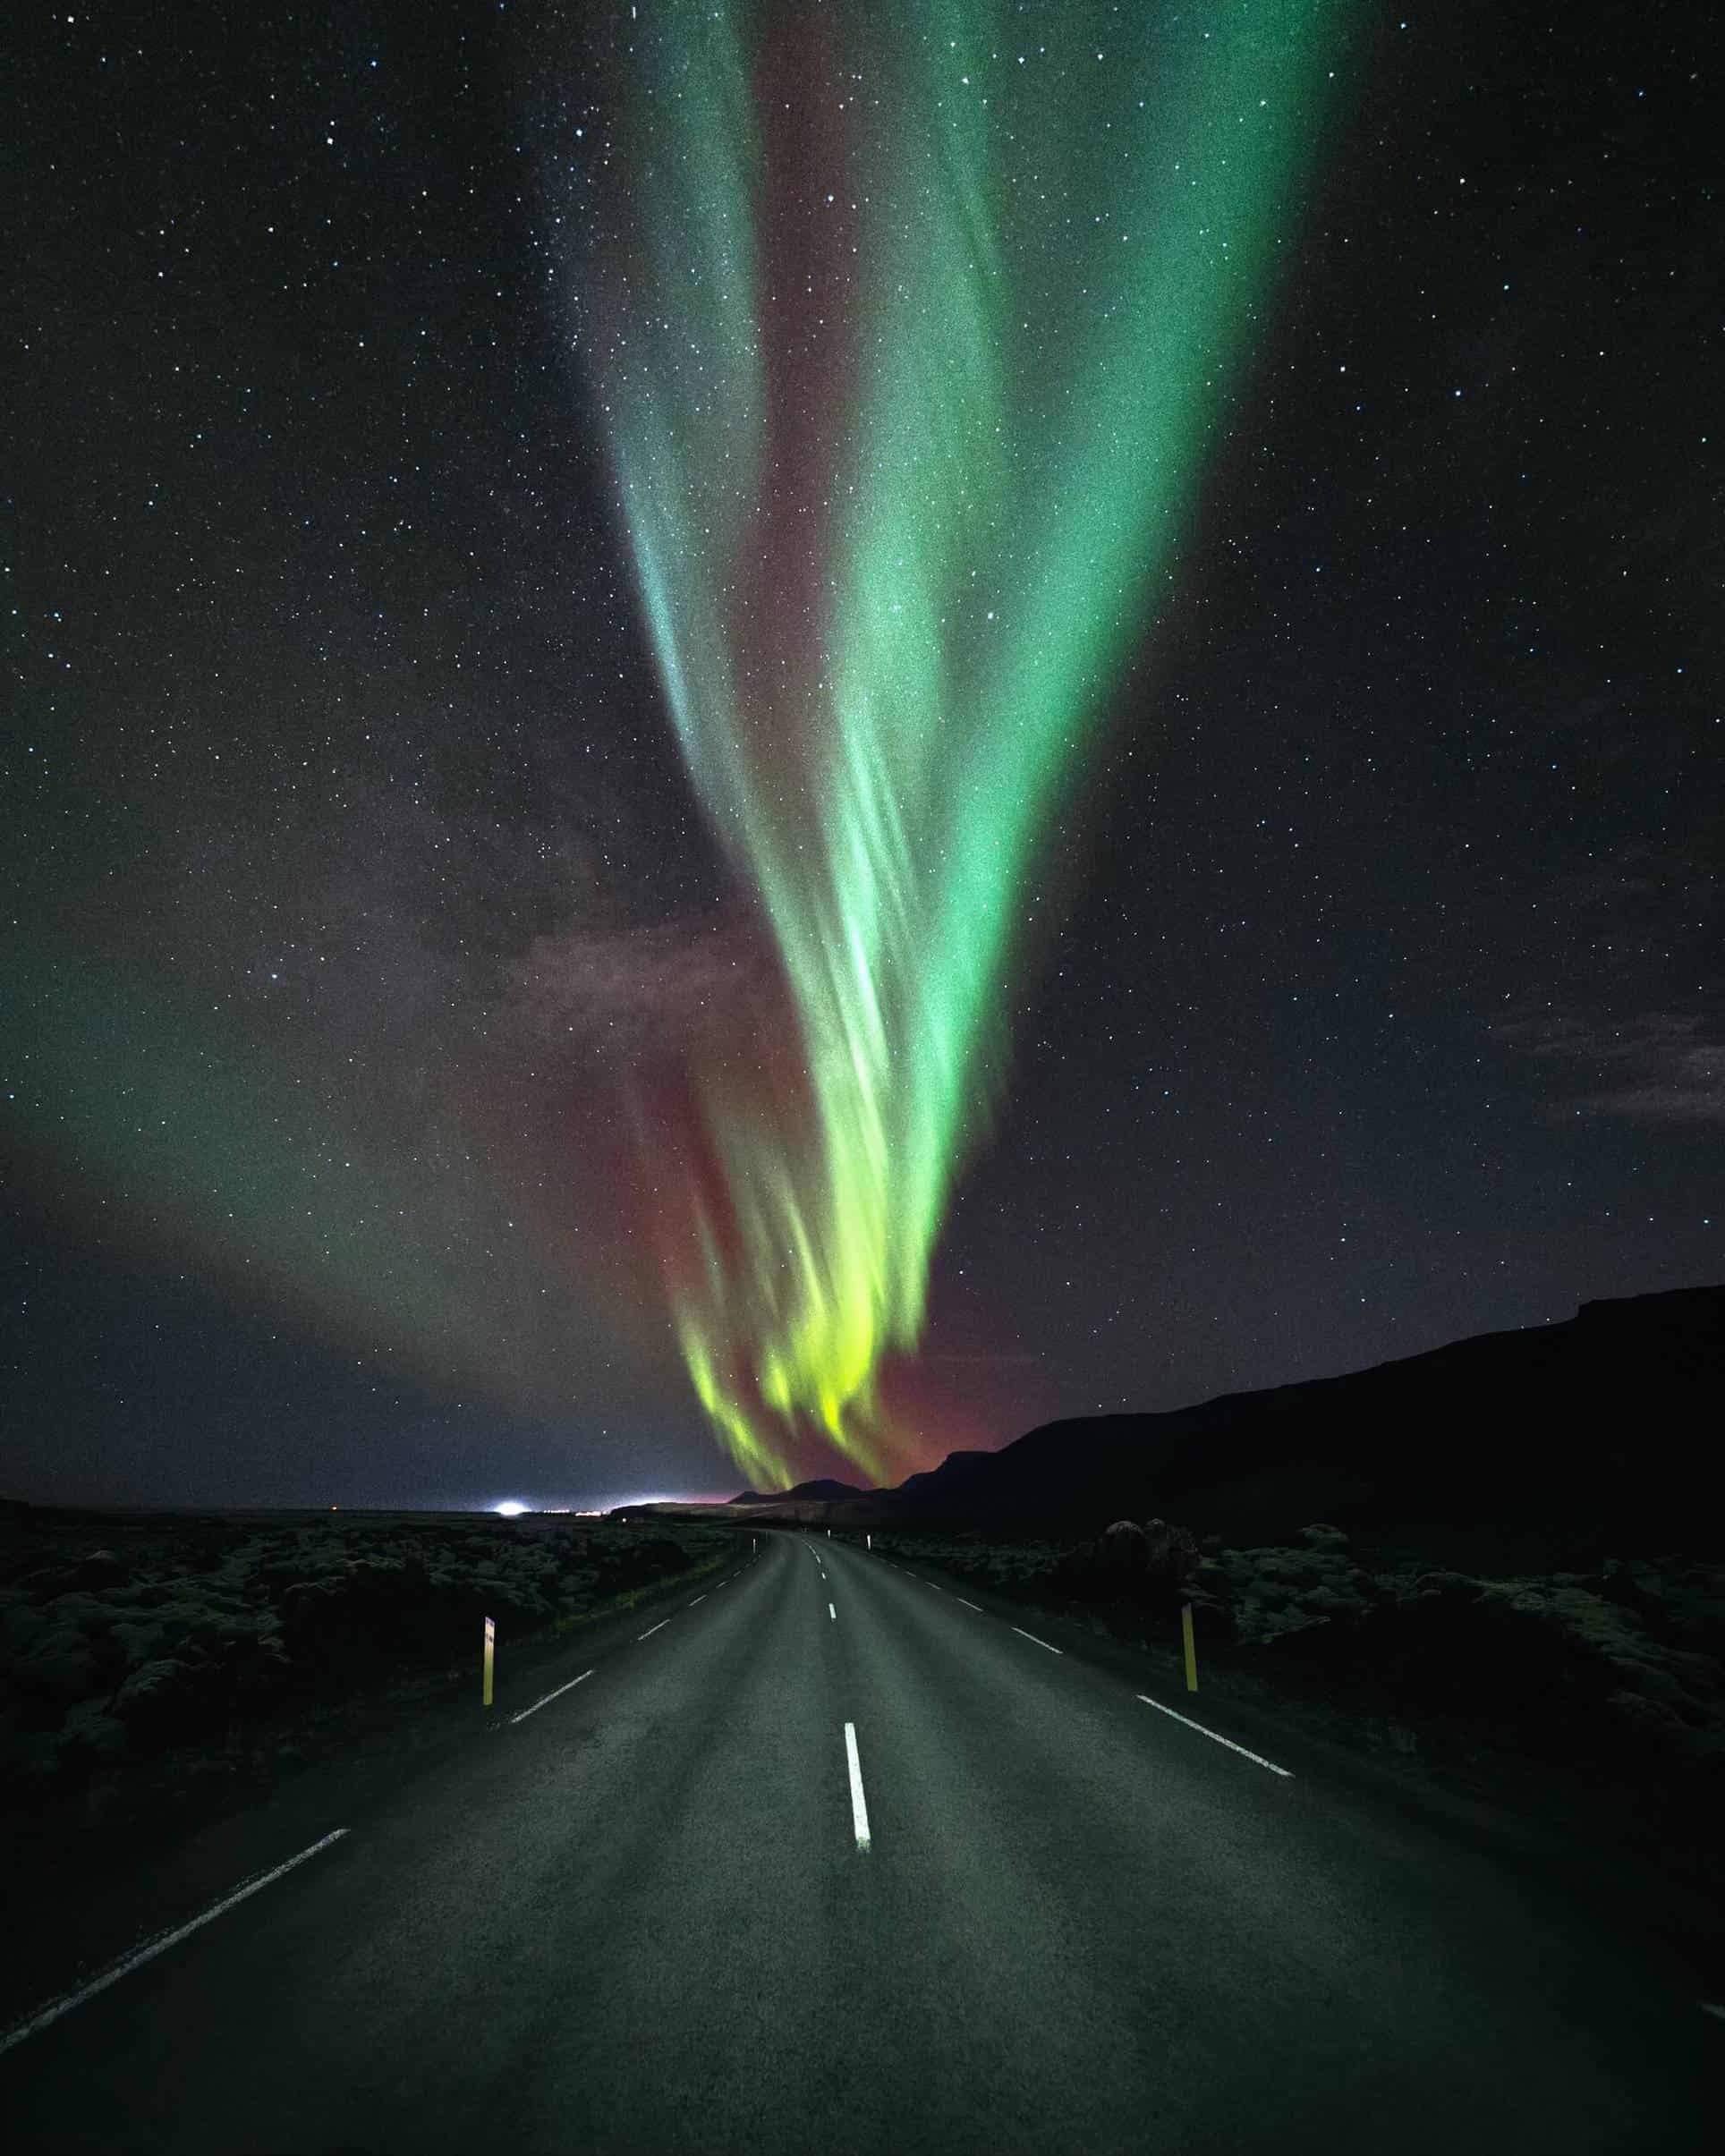 A band of pink and green northern lights shimmer above a paved country road in south Iceland.